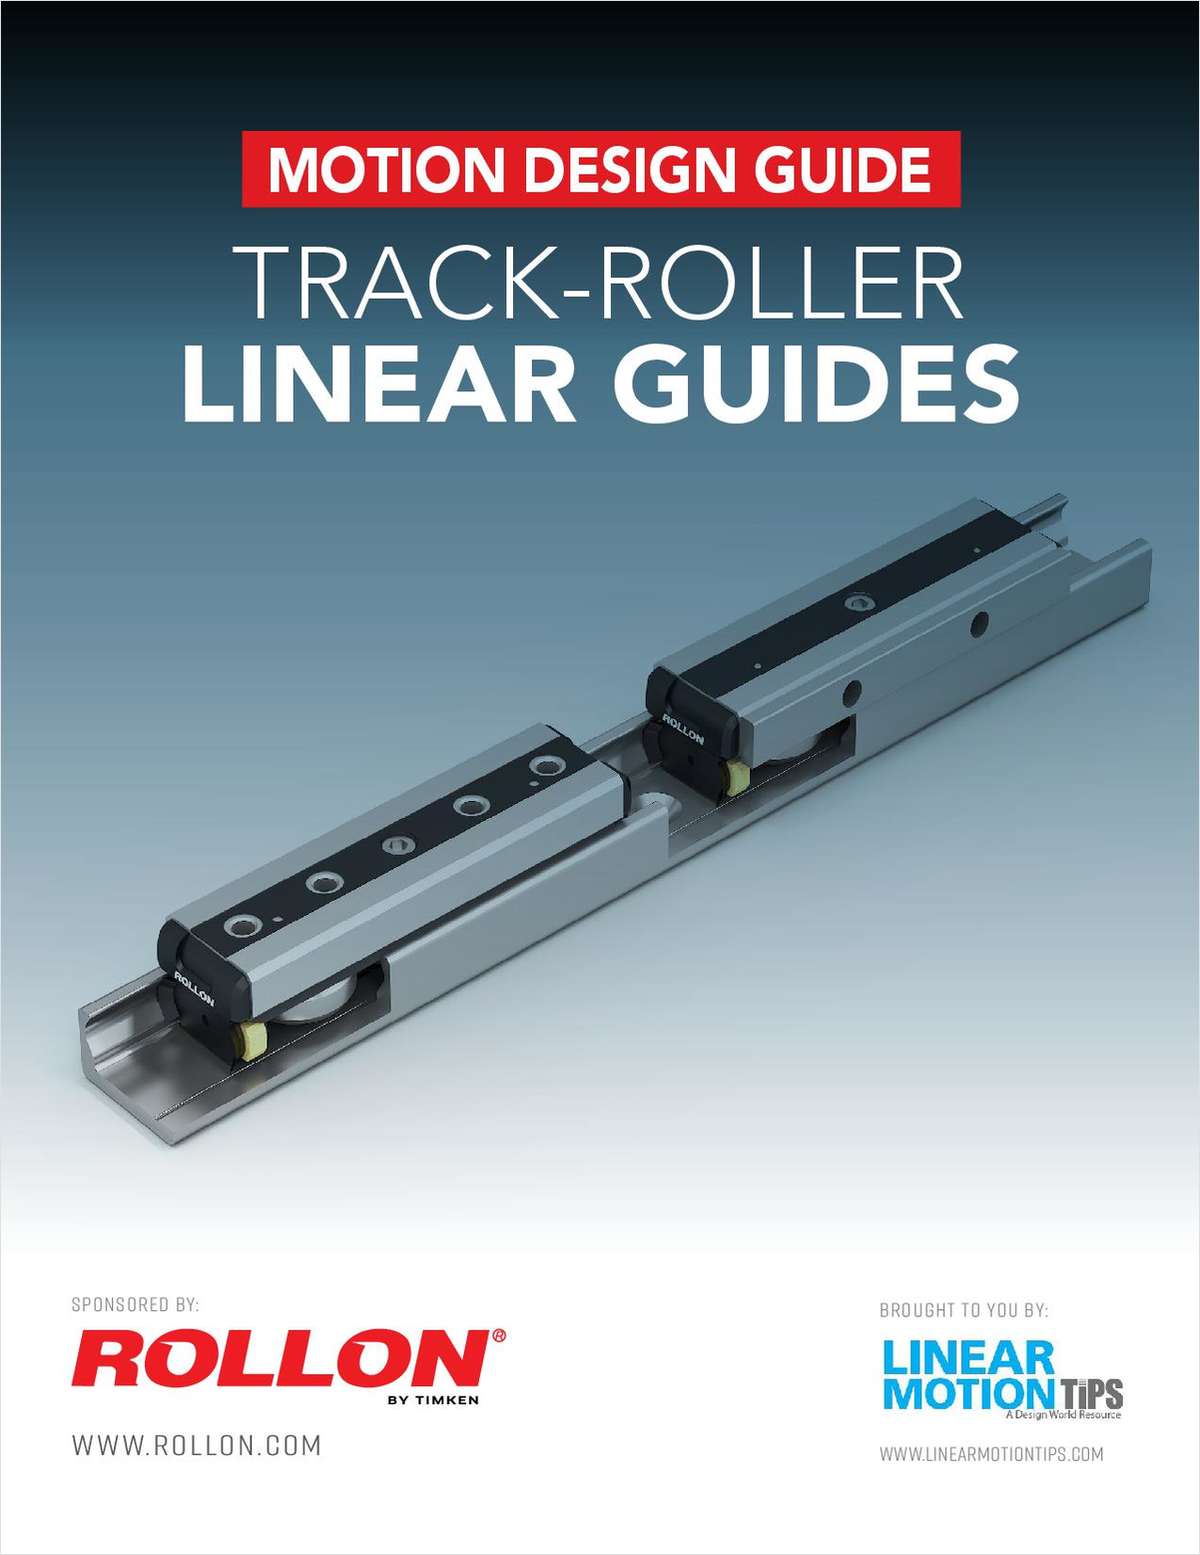 Track-Roller Linear Guides